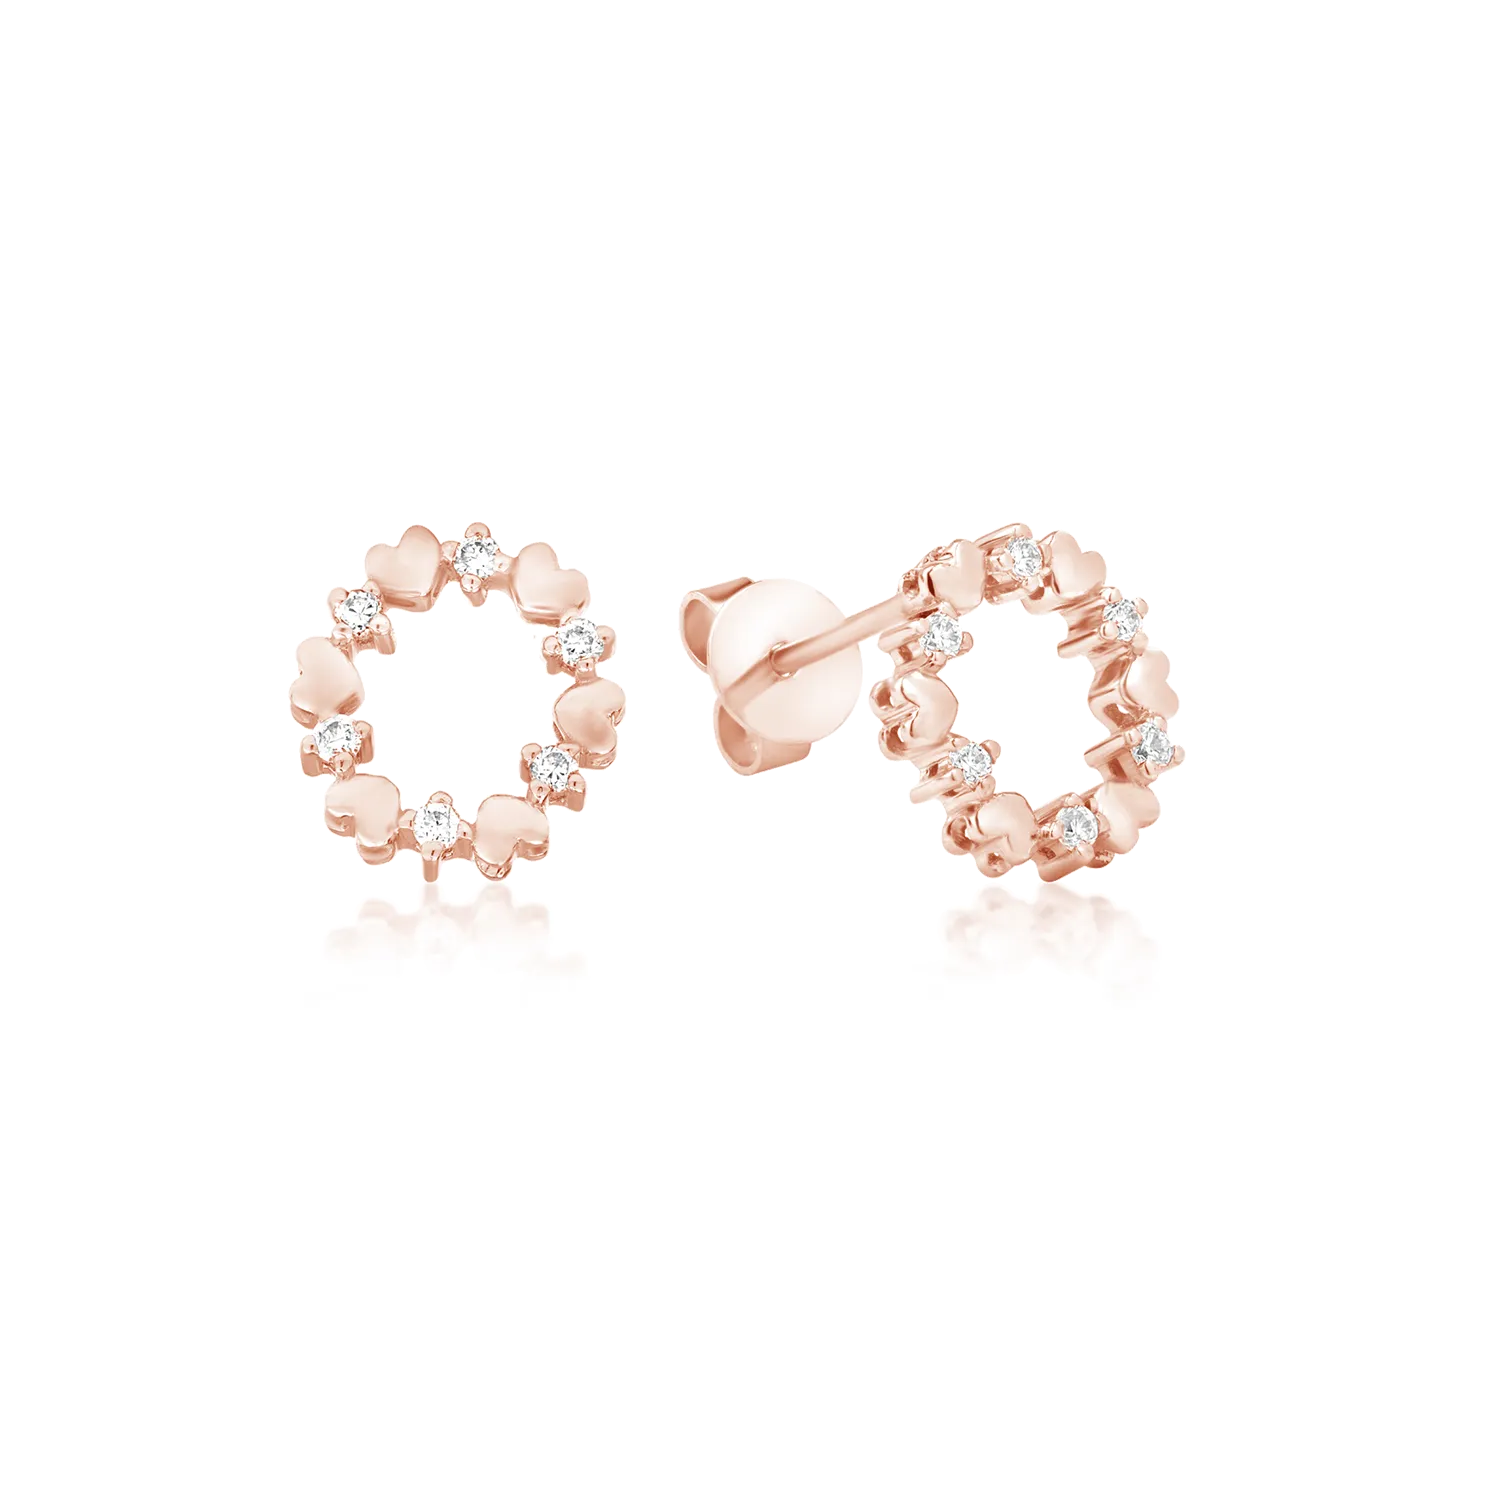 18K rose gold earrings with 0.102ct diamonds